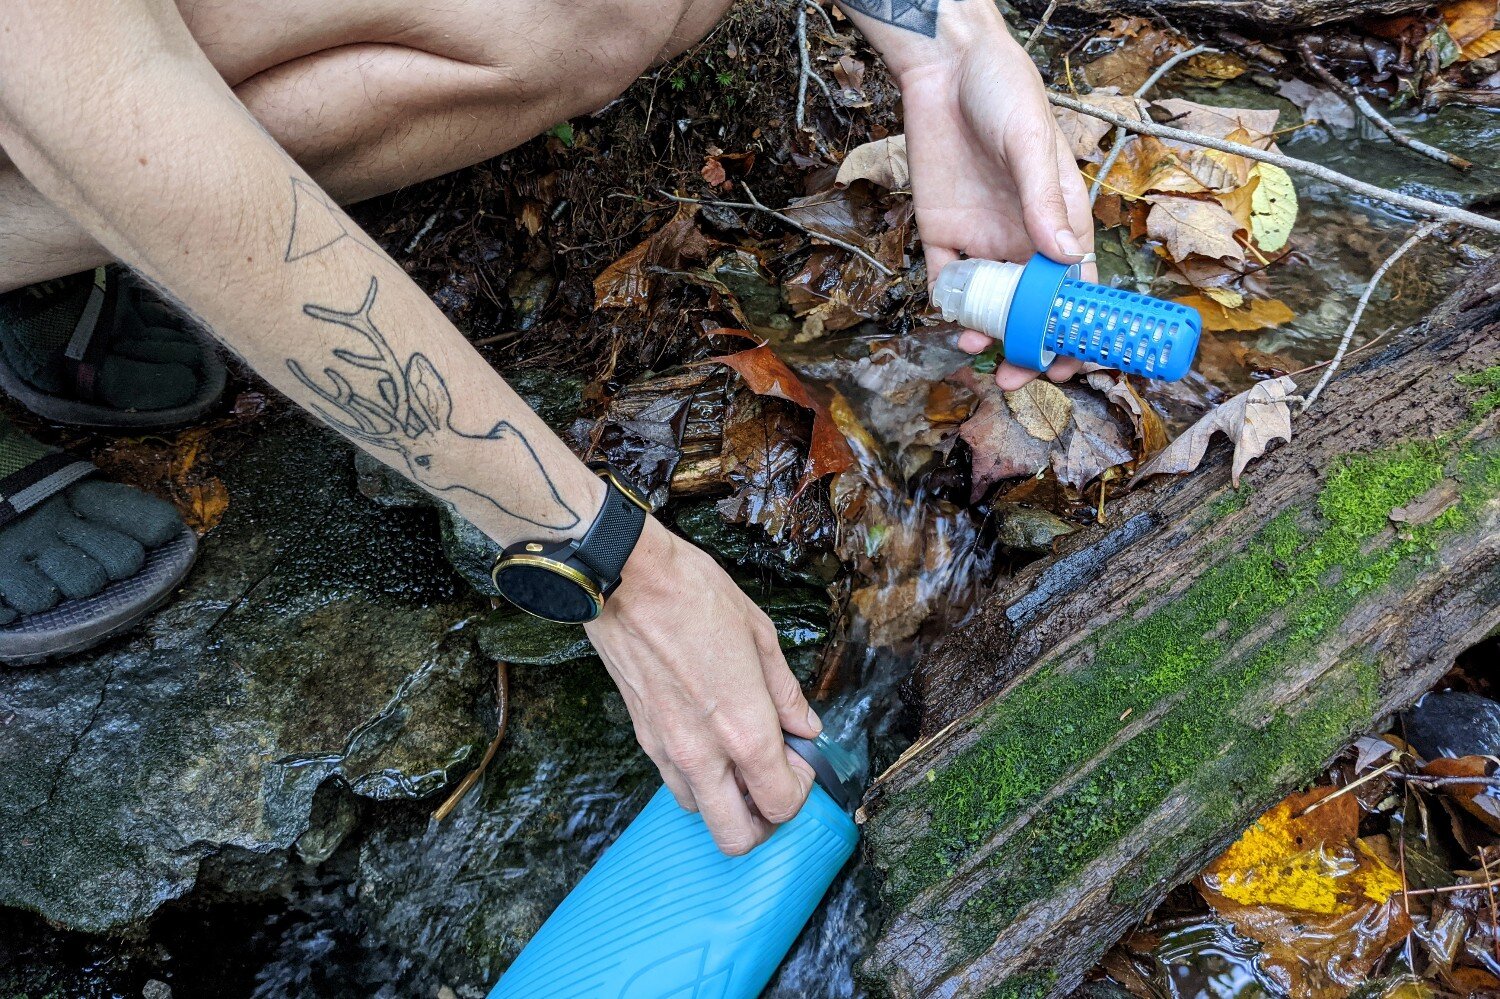 Filtering water with the BeFree is as easy filling your bottle from the source, screwing the filter back on, and drinking